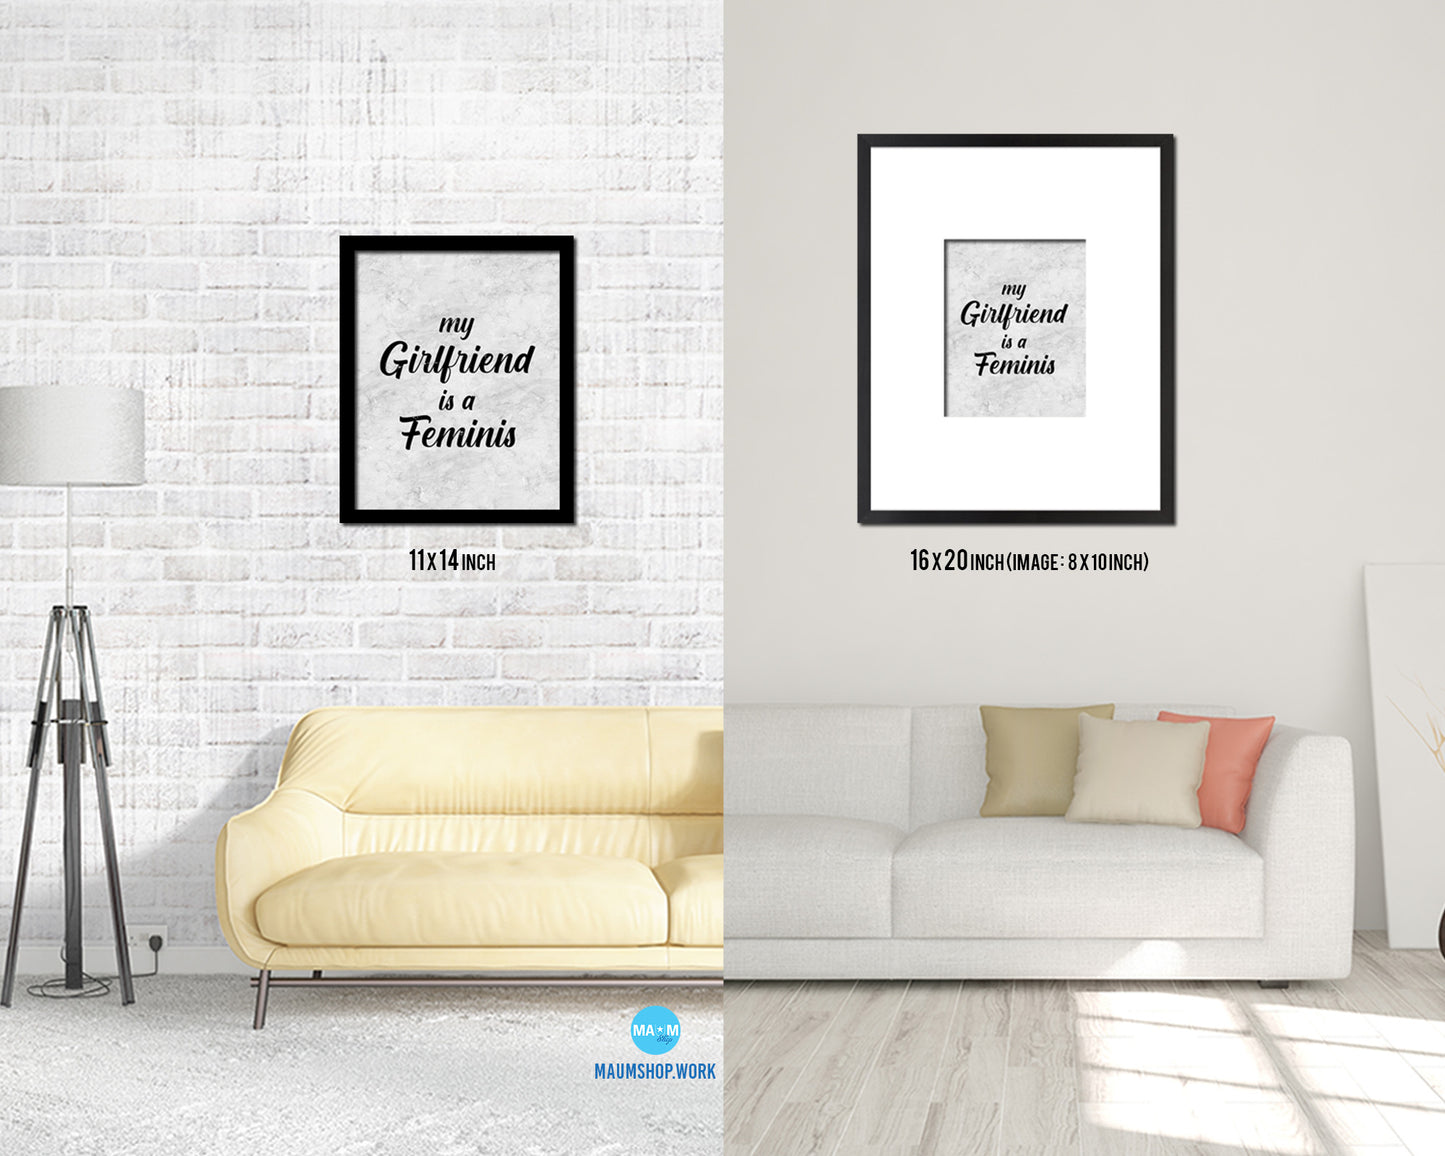 My girlfriend is a fiminist Quote Framed Print Wall Art Decor Gifts